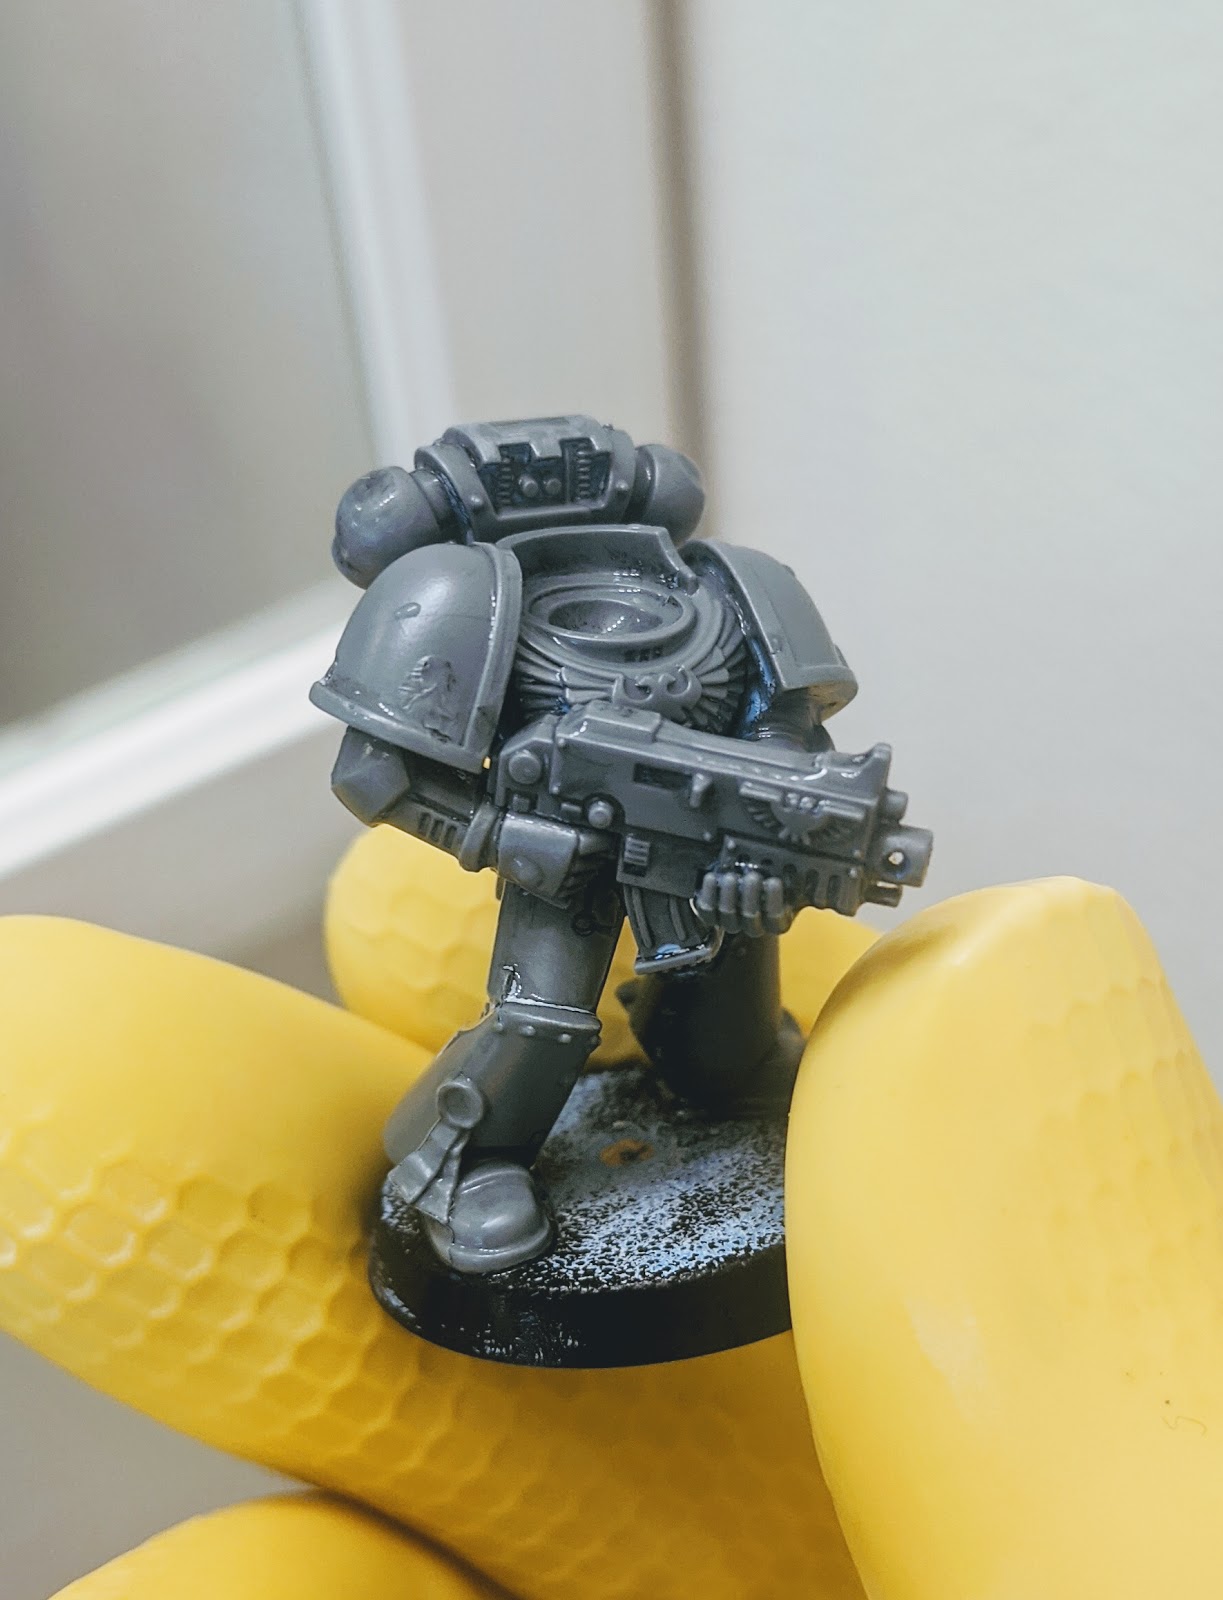 Model paint stripping with super clean. Soak, and lightly scrub. :  r/modelmakers